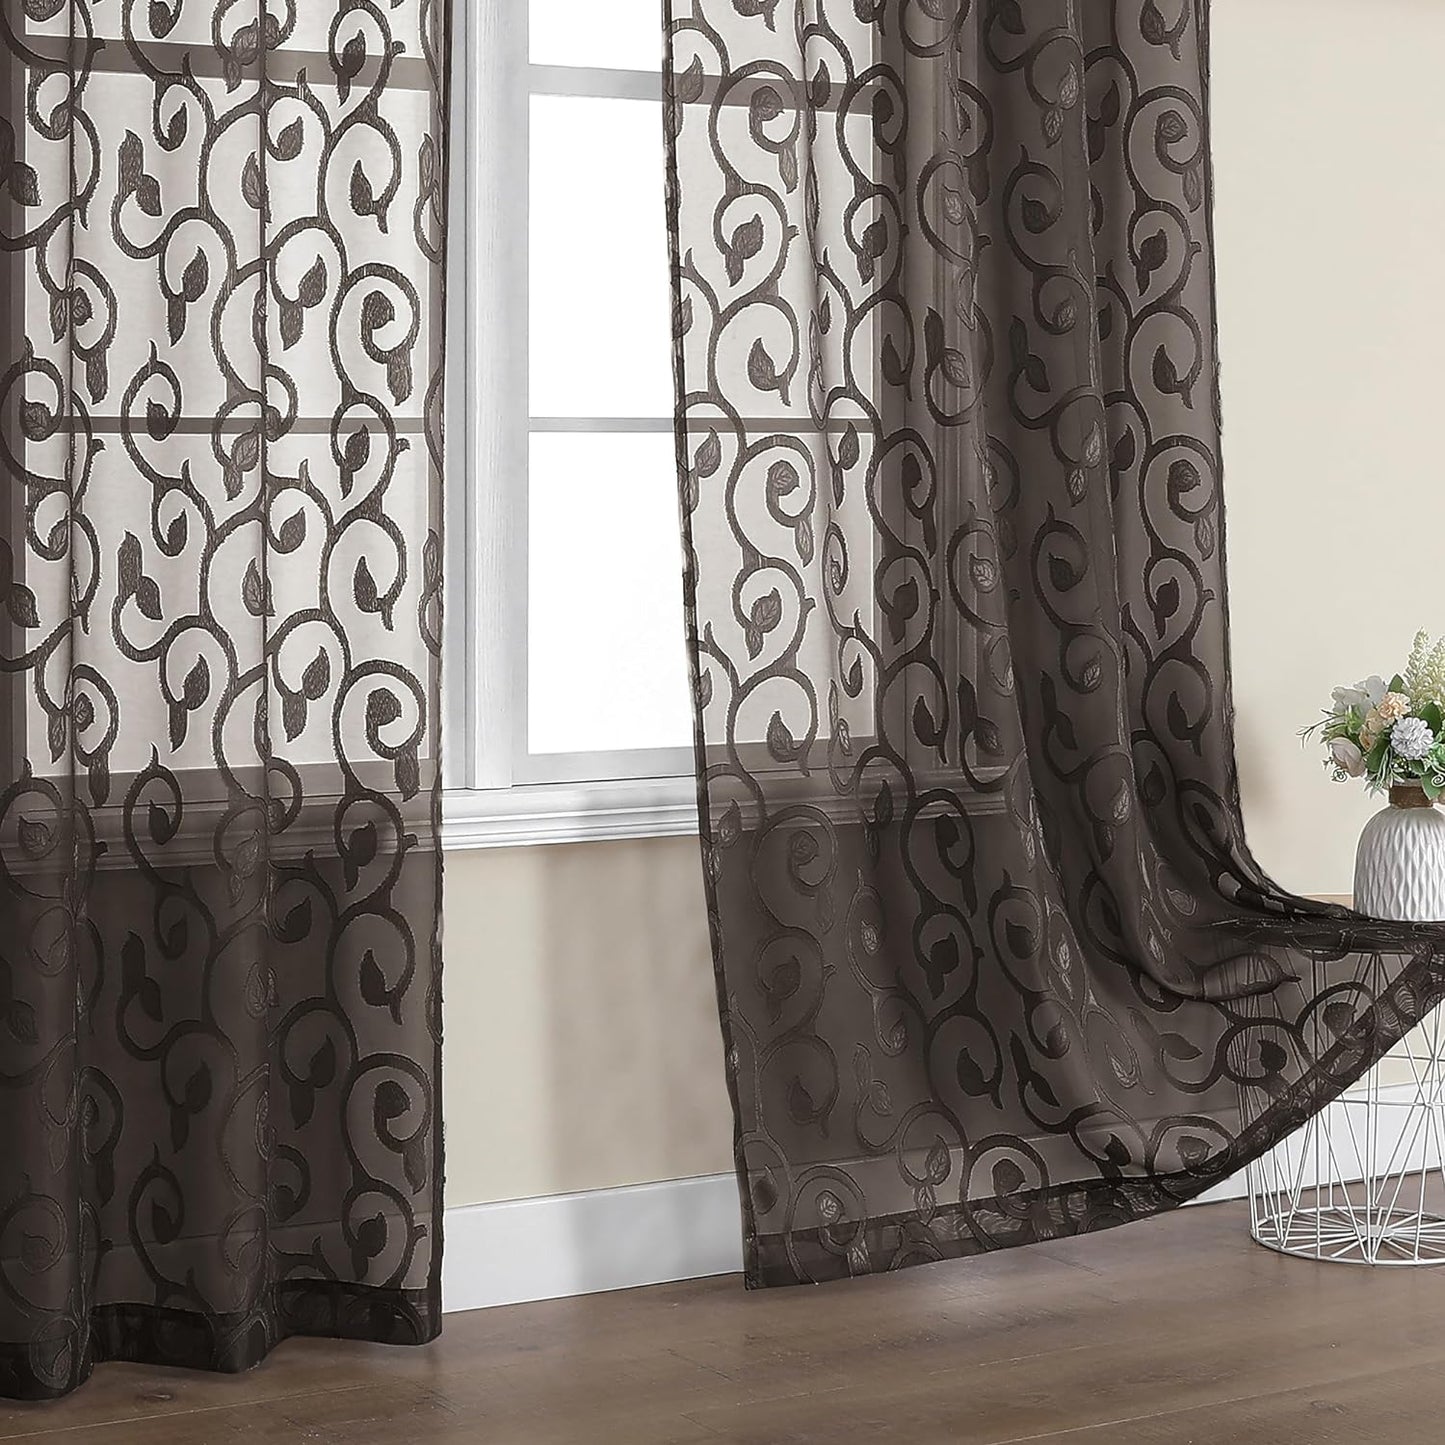 OWENIE Furman Sheer Curtains 84 Inches Long for Bedroom Living Room 2 Panels Set, Light Filtering Window Curtains, Semi Transparent Voile Top Dual Rod Pocket, Grey, 40Wx84L Inch, Total 84 Inches Width  OWENIE Chocolate 40W X 84L 